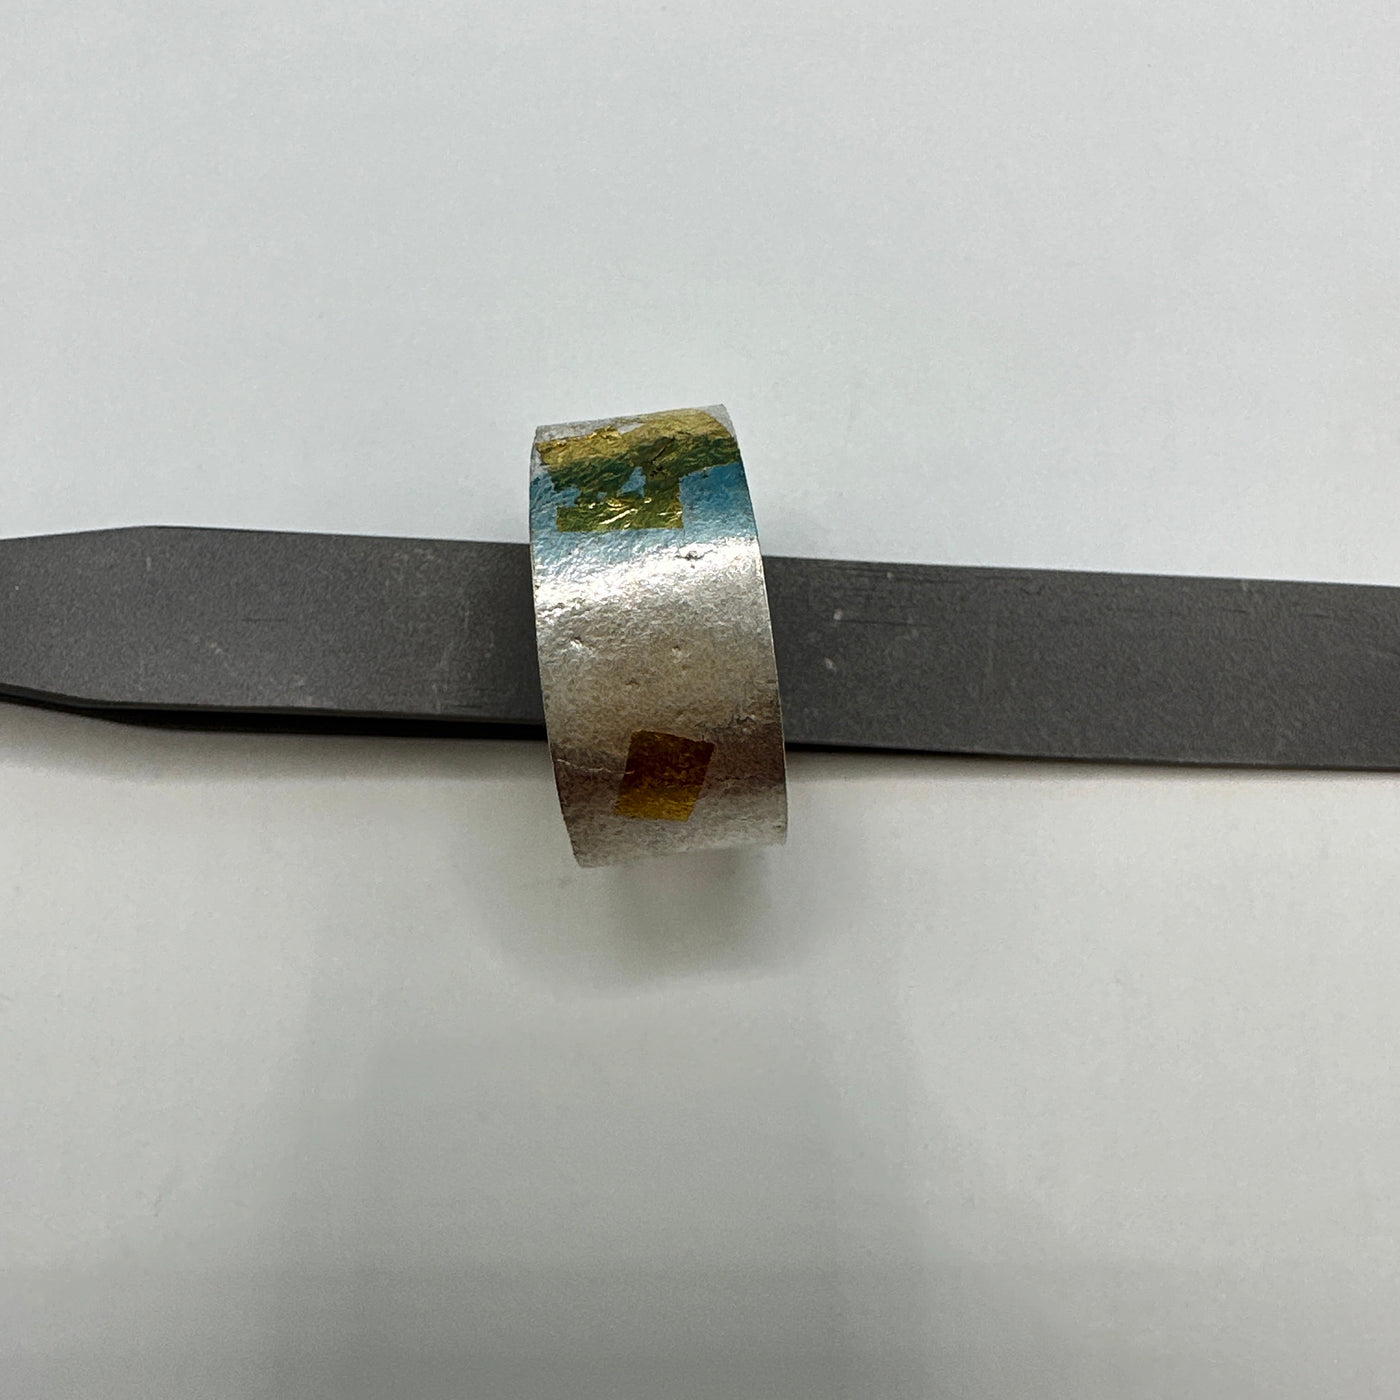 Reticulation and Keumboo technique for this silver sterling and gold ring band